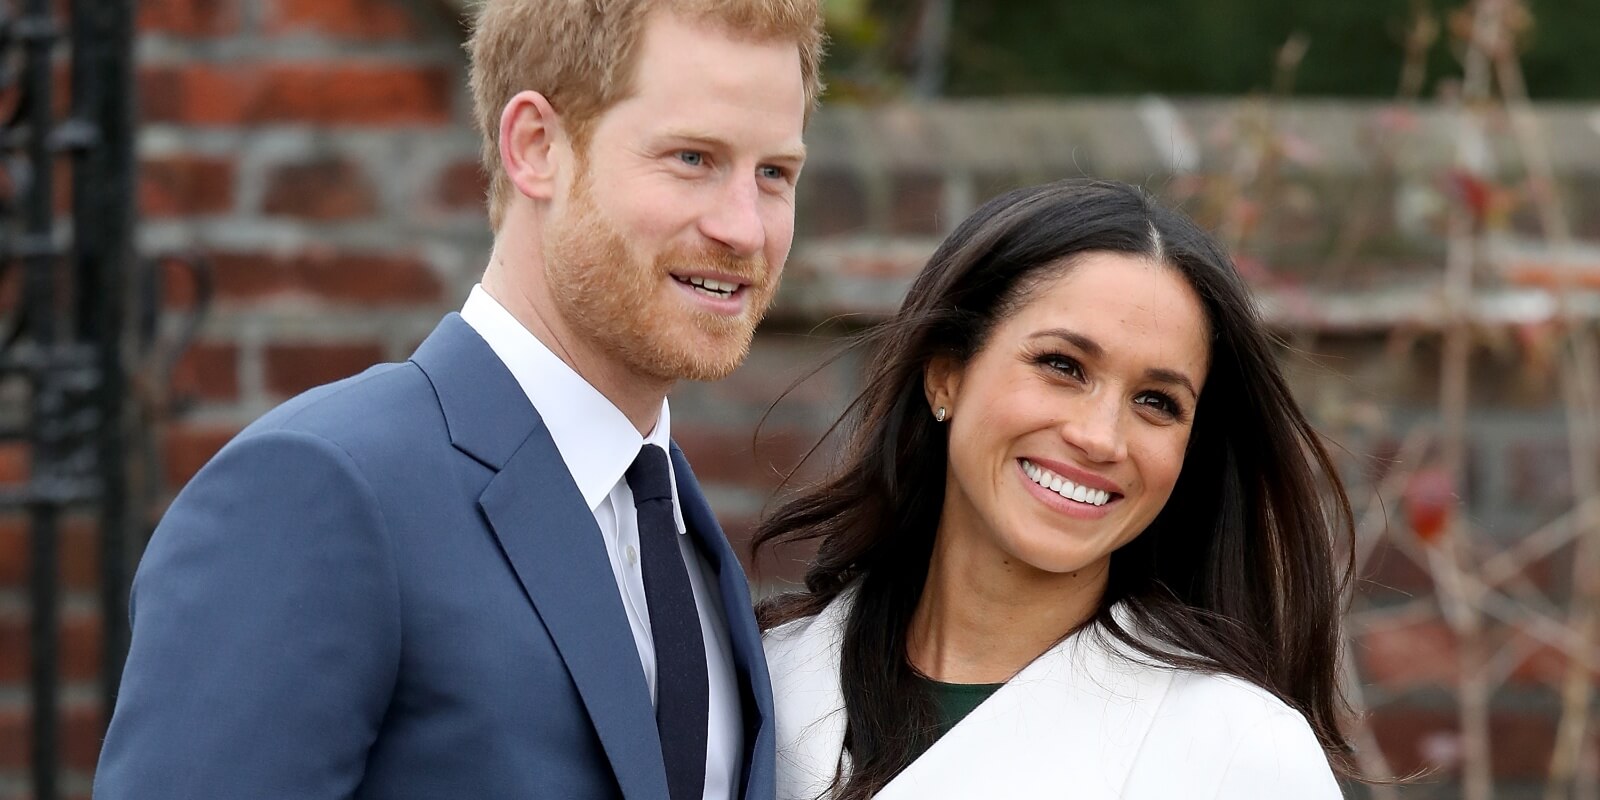 Prince Harry and Meghan Markle pose for photographers during their engagement announcement in 2017.